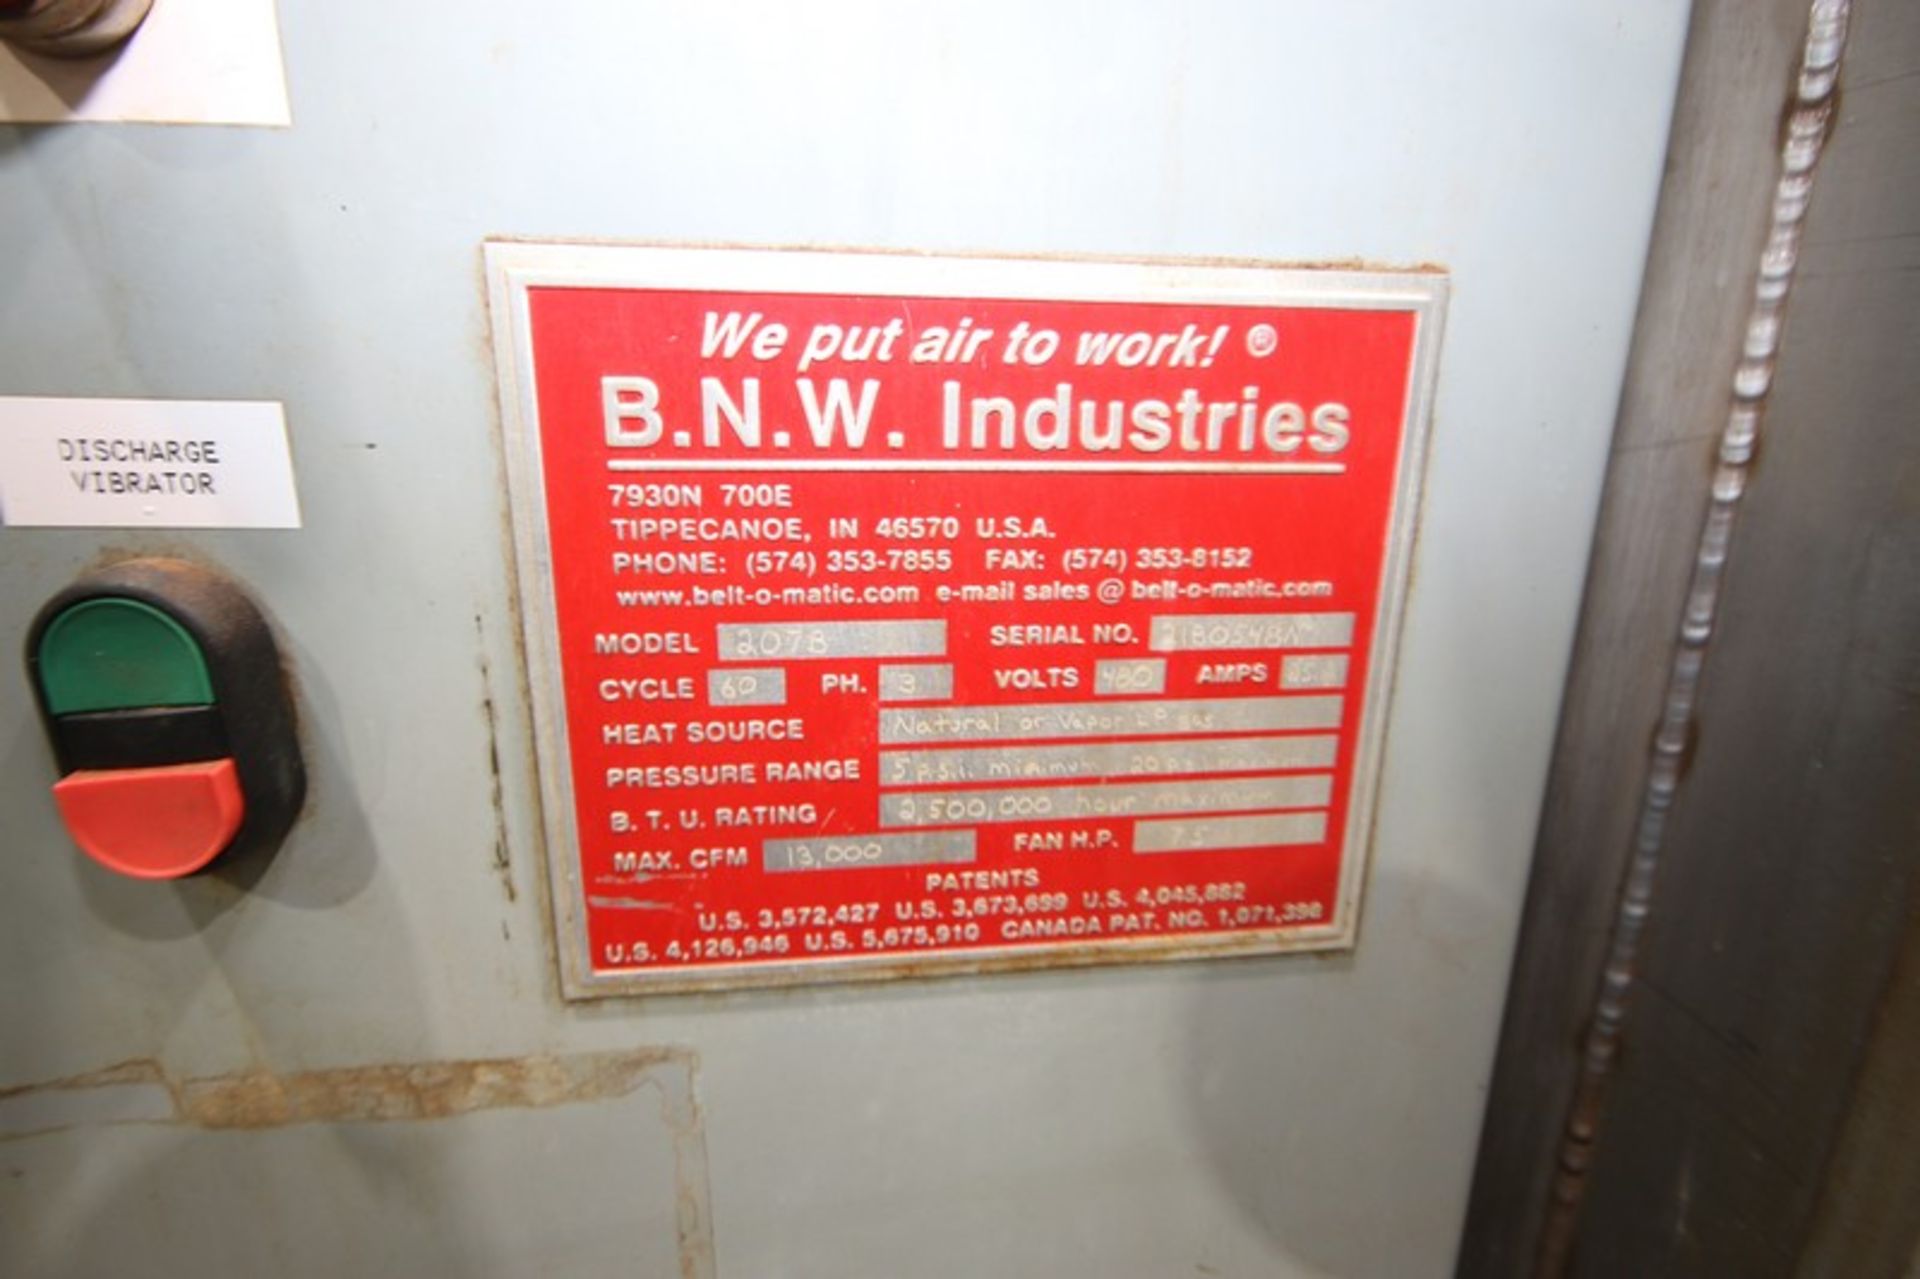 B.N.W. Industries S/S Dryer, M/N 207B, S/N 2180548N, 480 Volts, 1 Phase, Heat Source: Natural or - Image 6 of 12